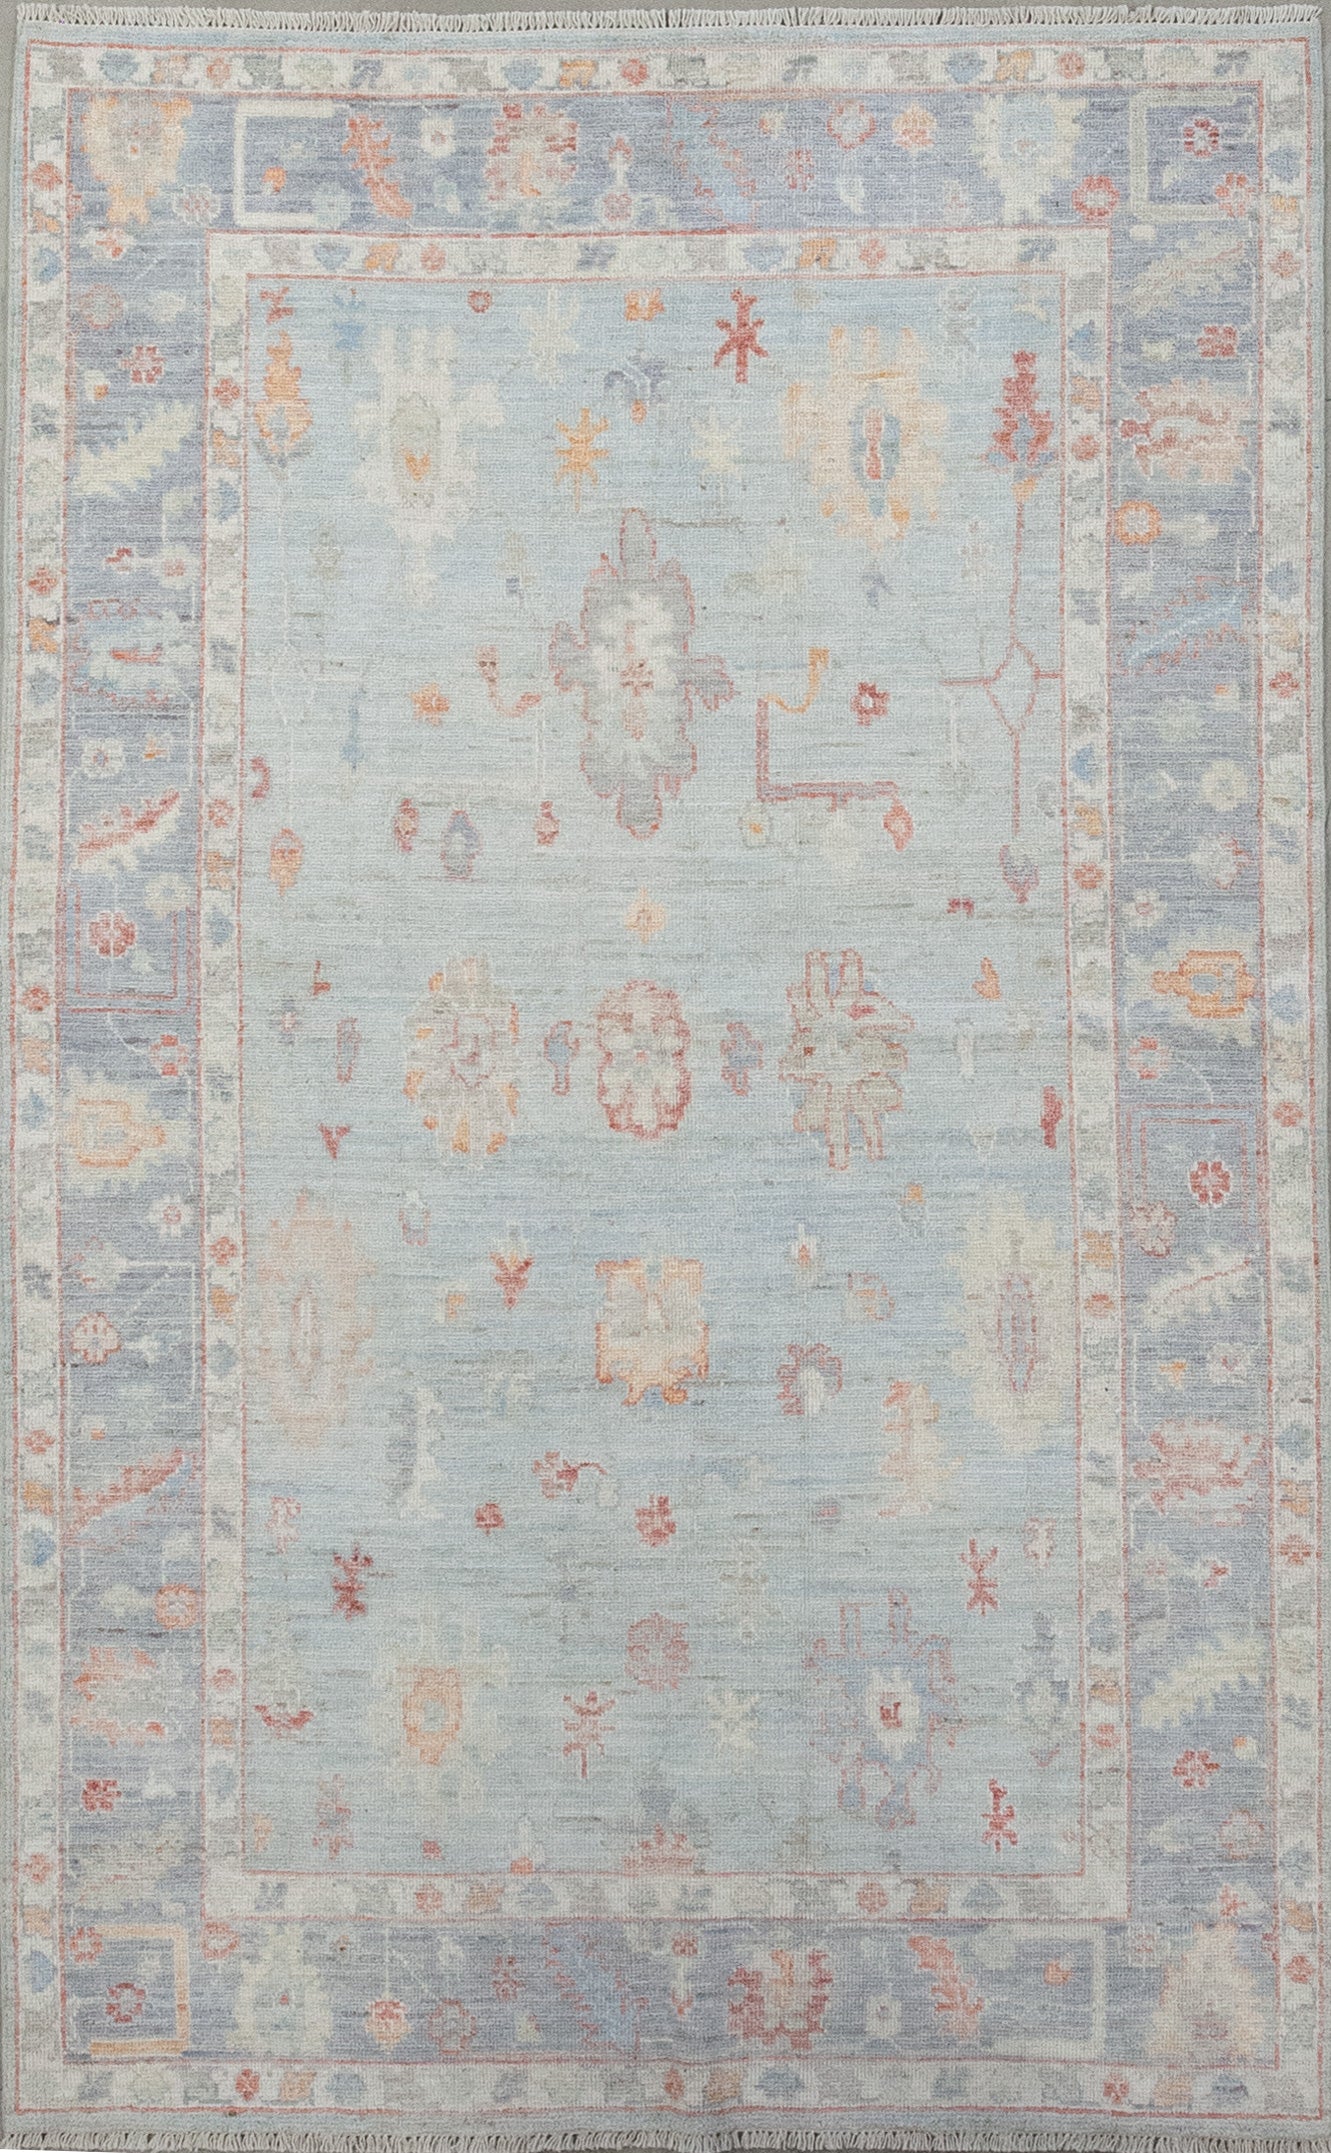 A sophisticated rug was woven in shades of blue as the dominant color, plus orange, red and white as contrast. The design features abstract red and white poppies, sunflowers, with branches all around it.